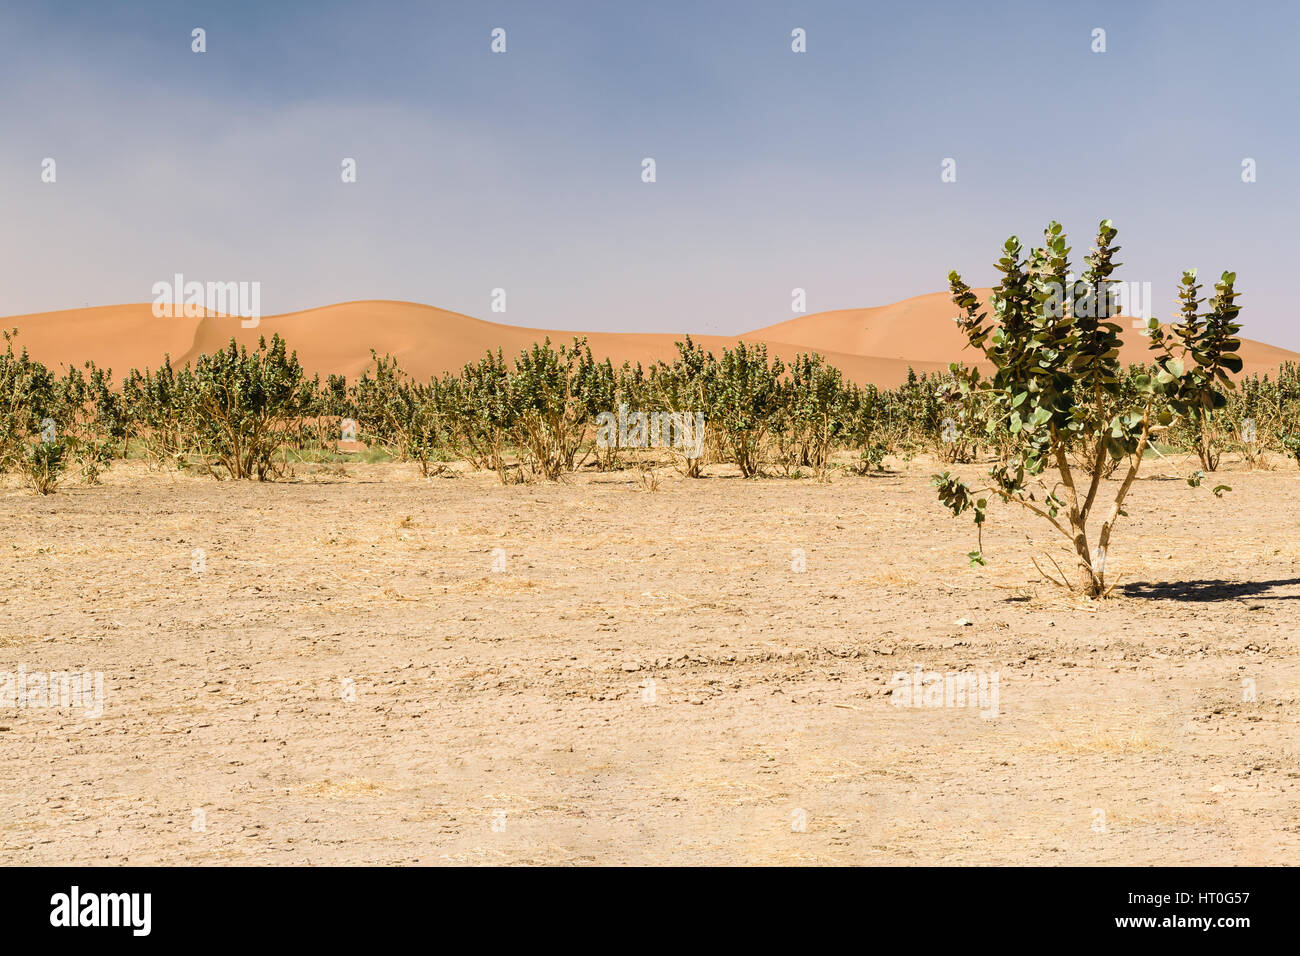 The sand dunes of the desert Erg Chegaga in Morocco with some trees in the foreground. Stock Photo